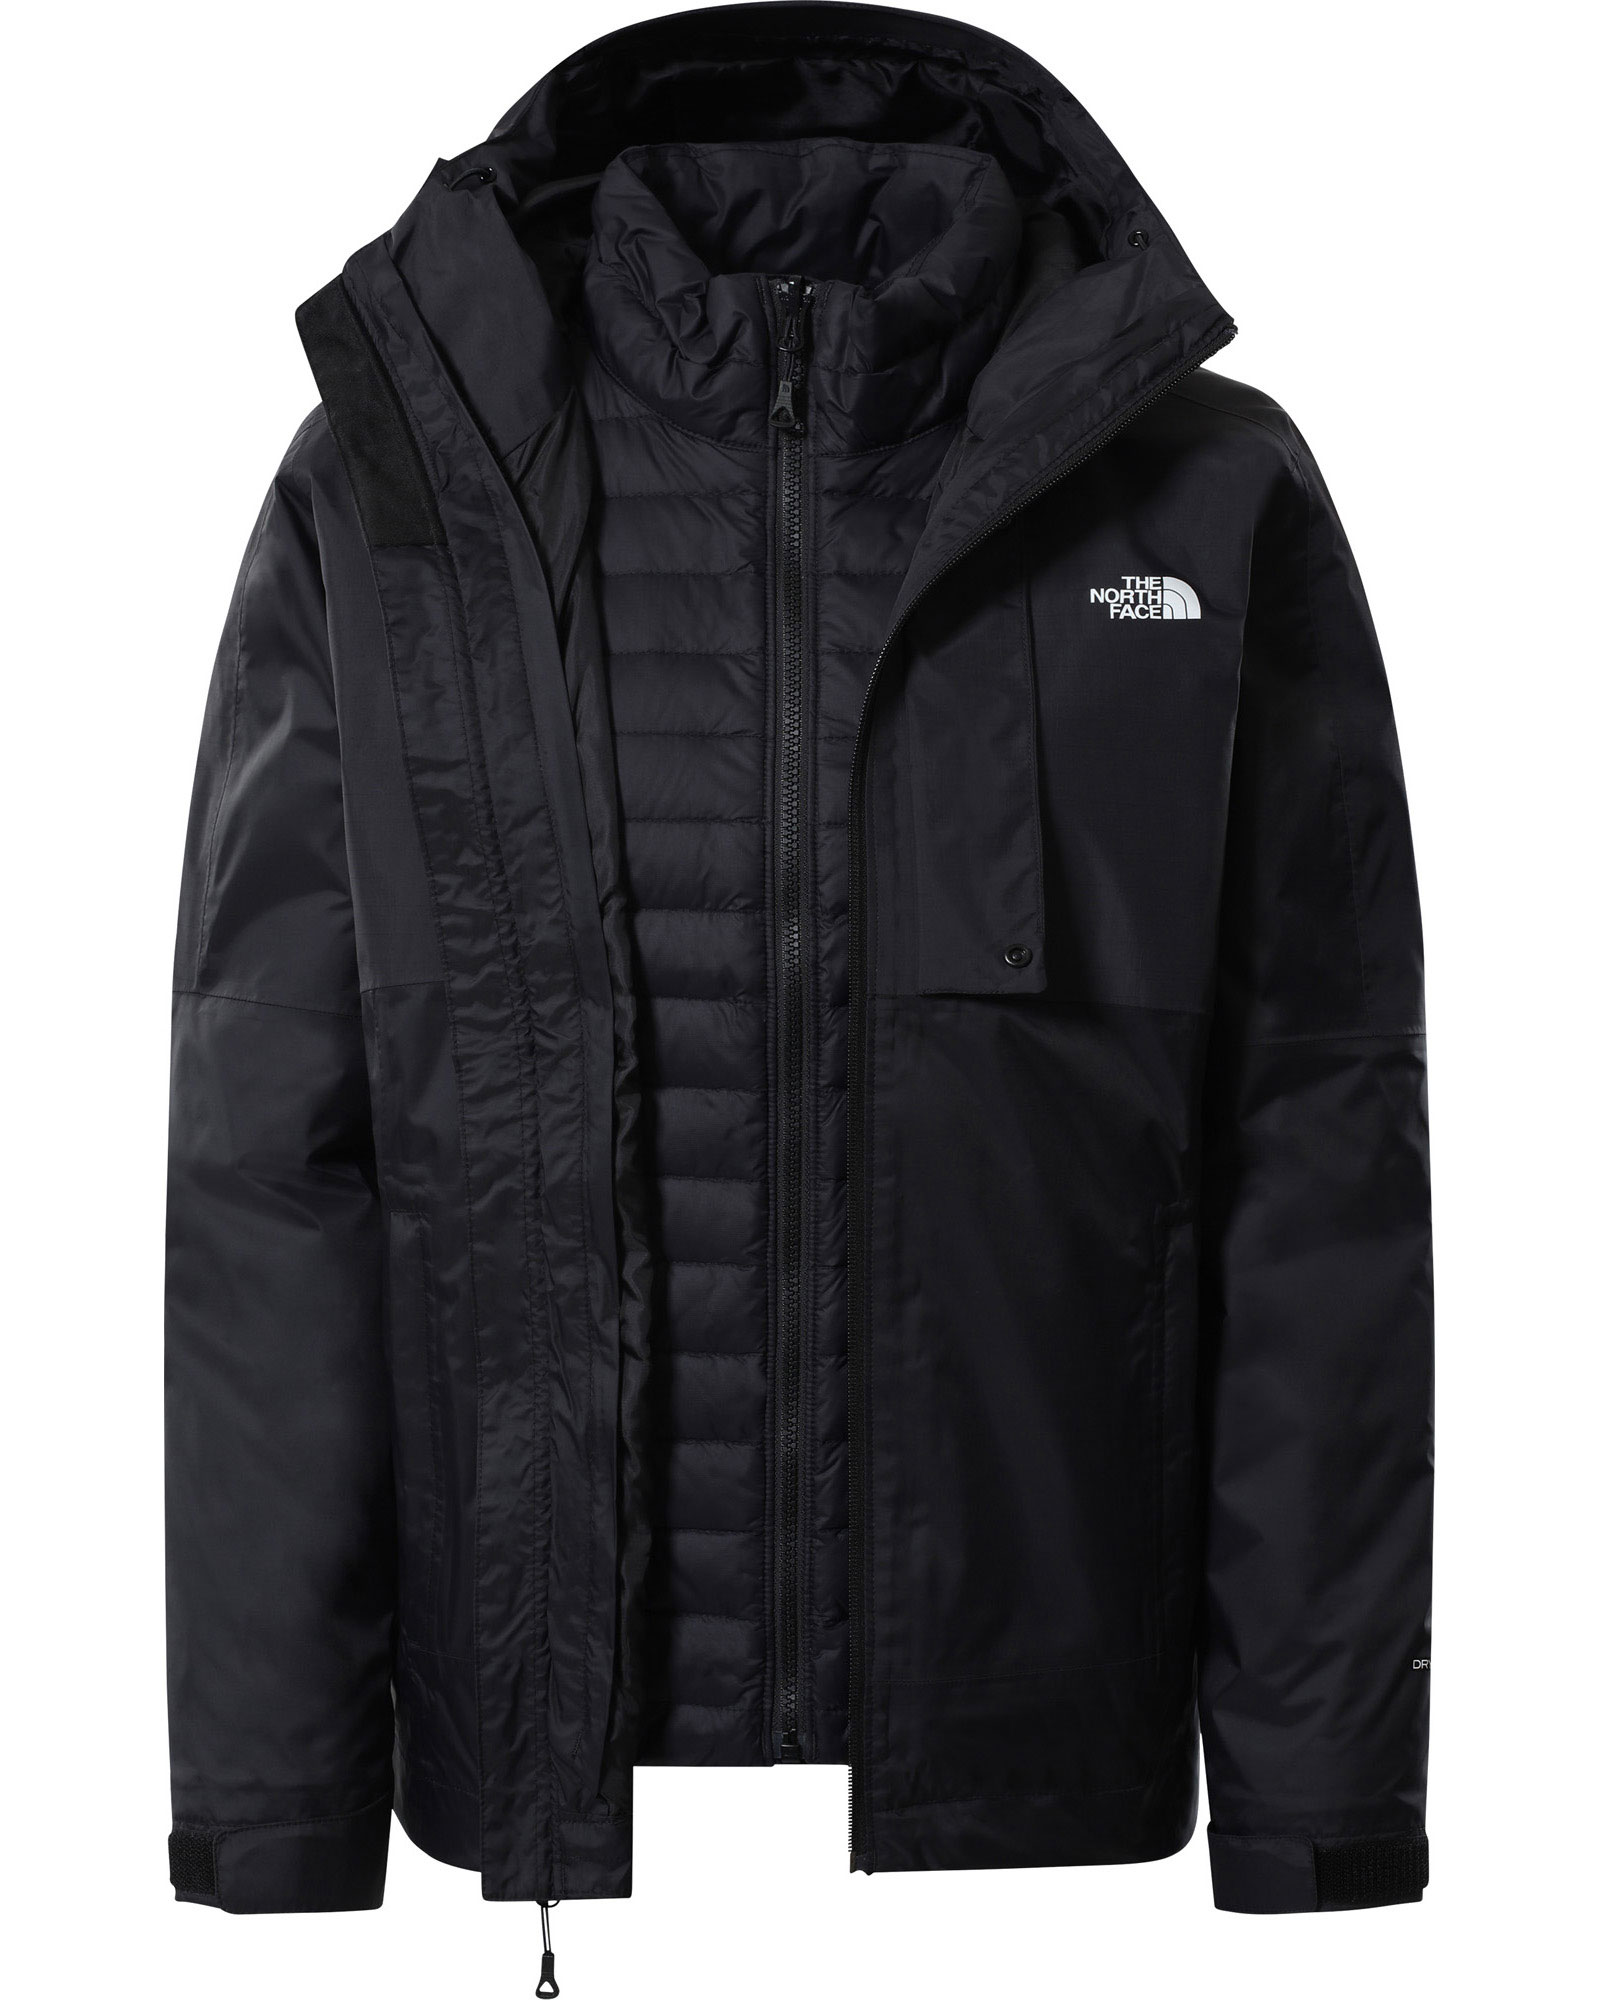 The North Face Down Insulated Triclimate Women’s Parka Jacket - TNF Black L